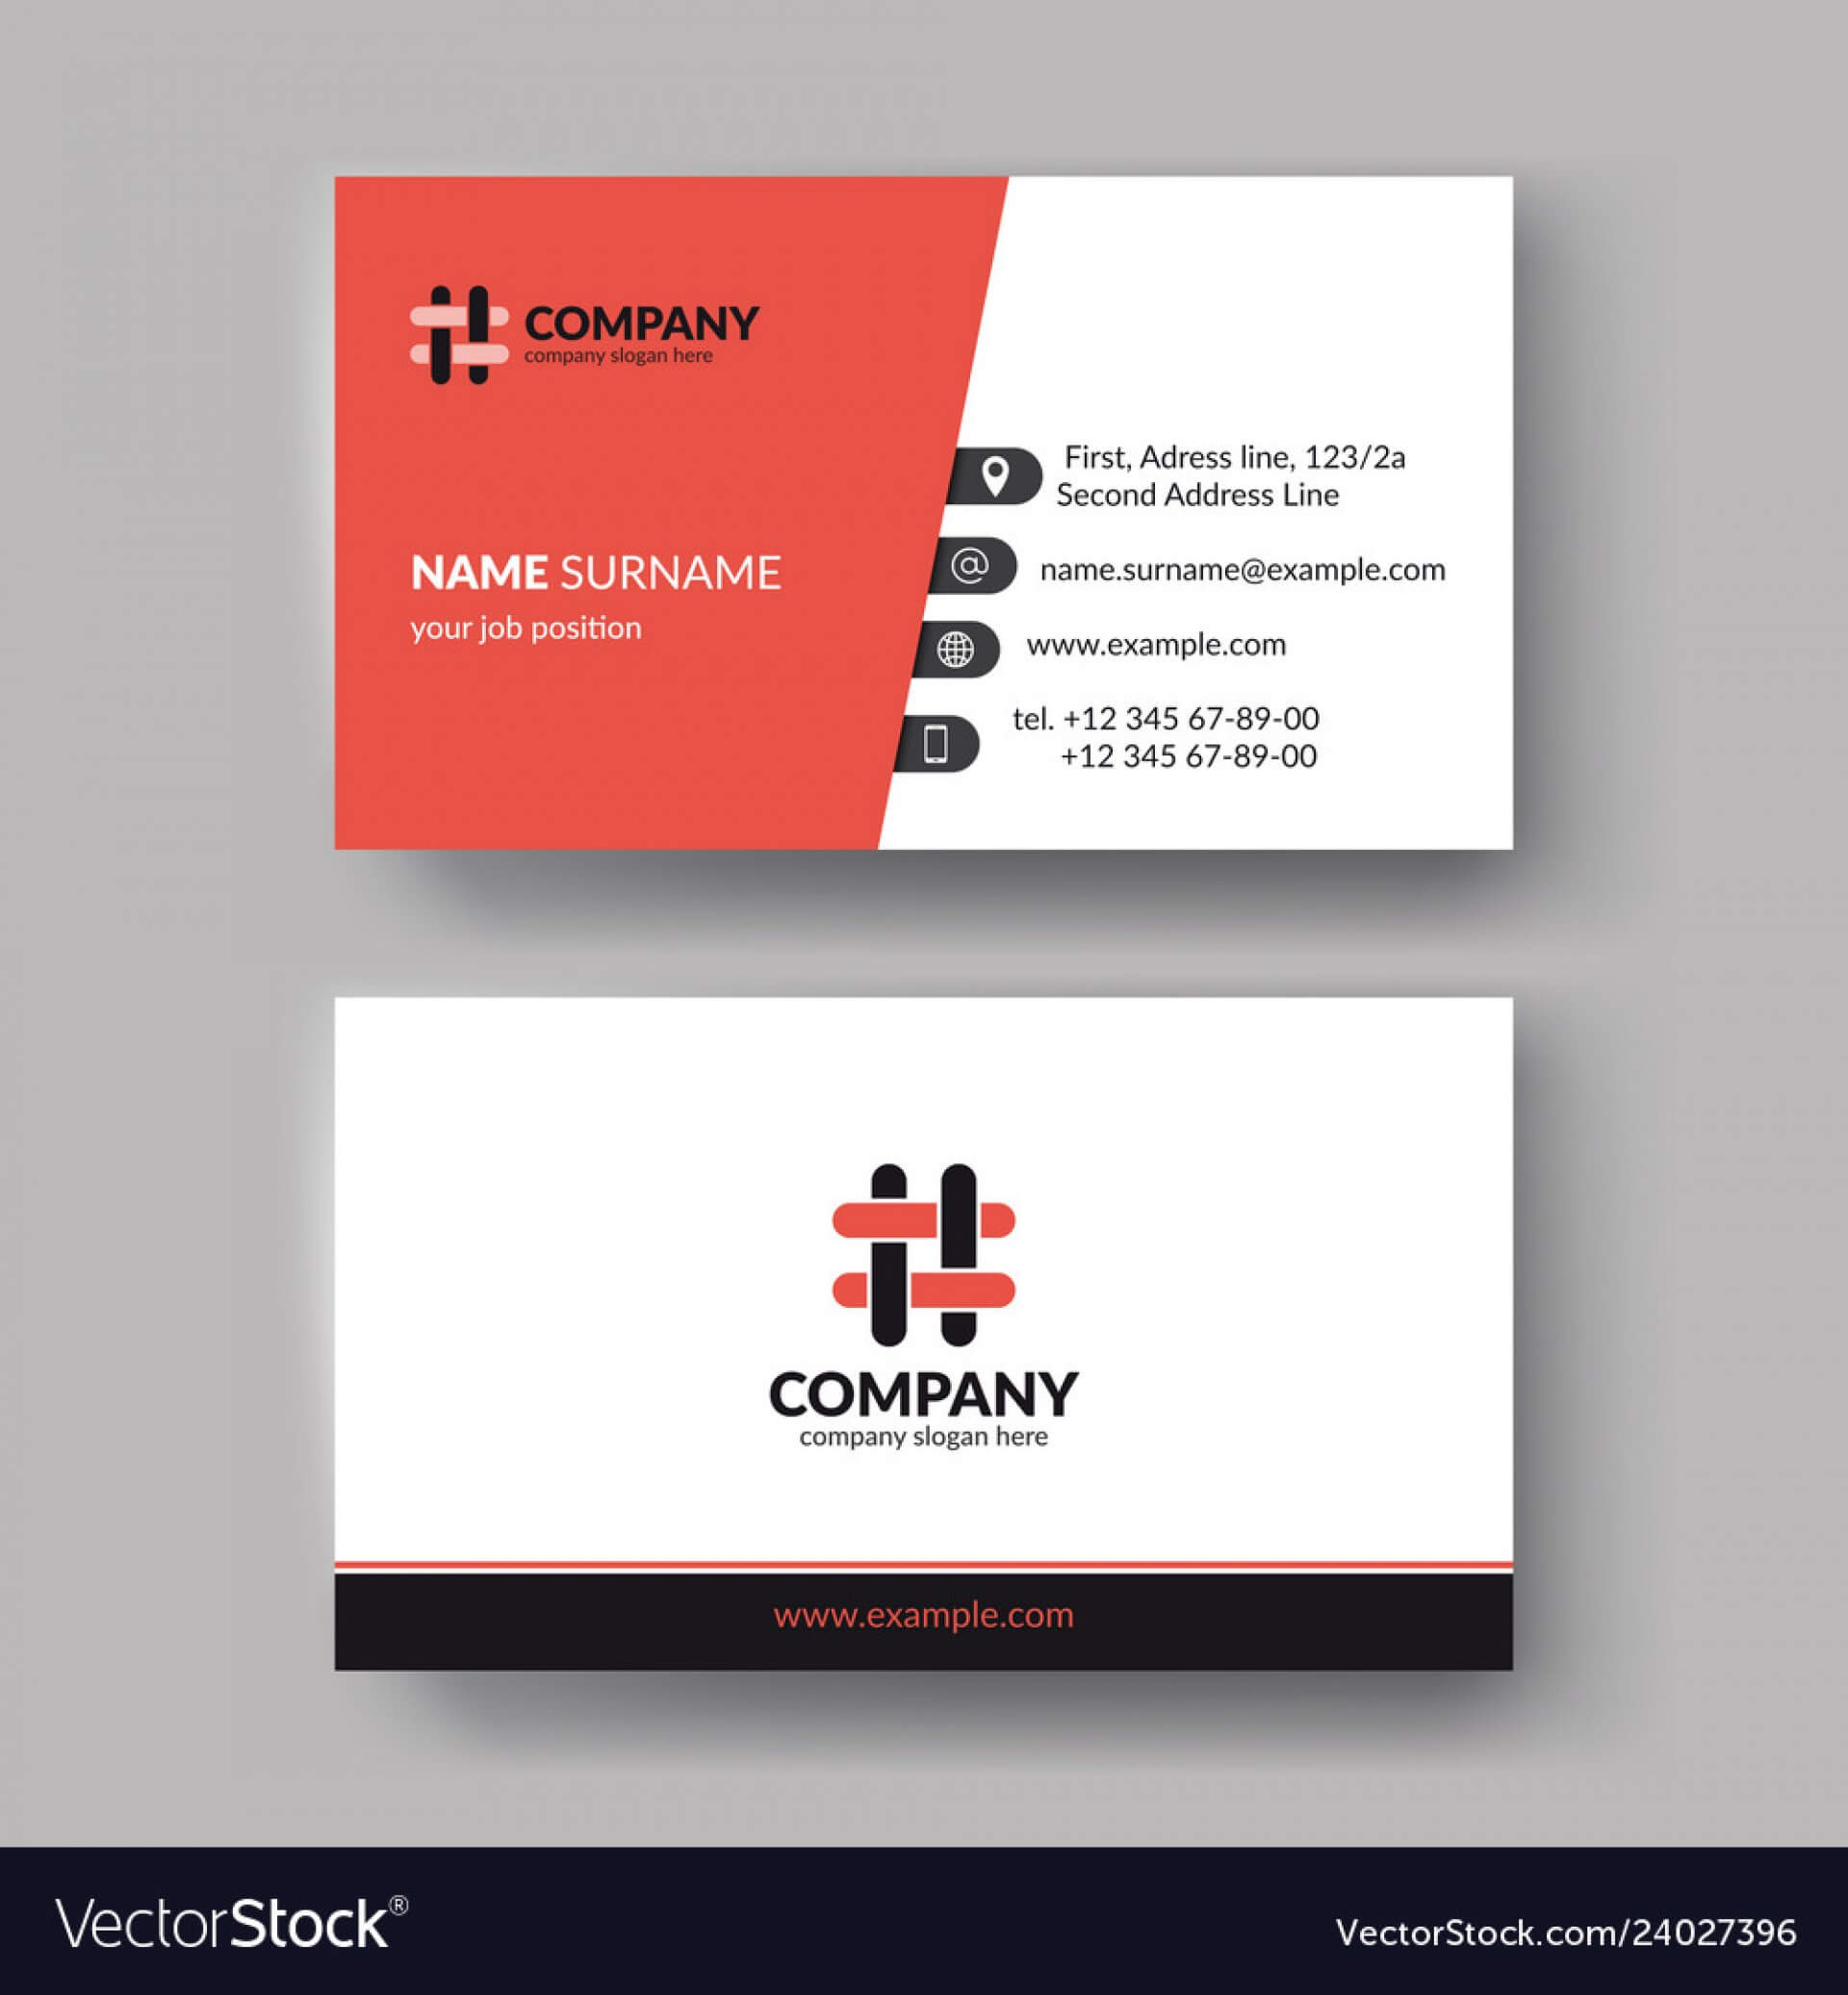 034 Free Business Card Template Ideas Shocking Templates Psd Pertaining To Adobe Illustrator Card Template